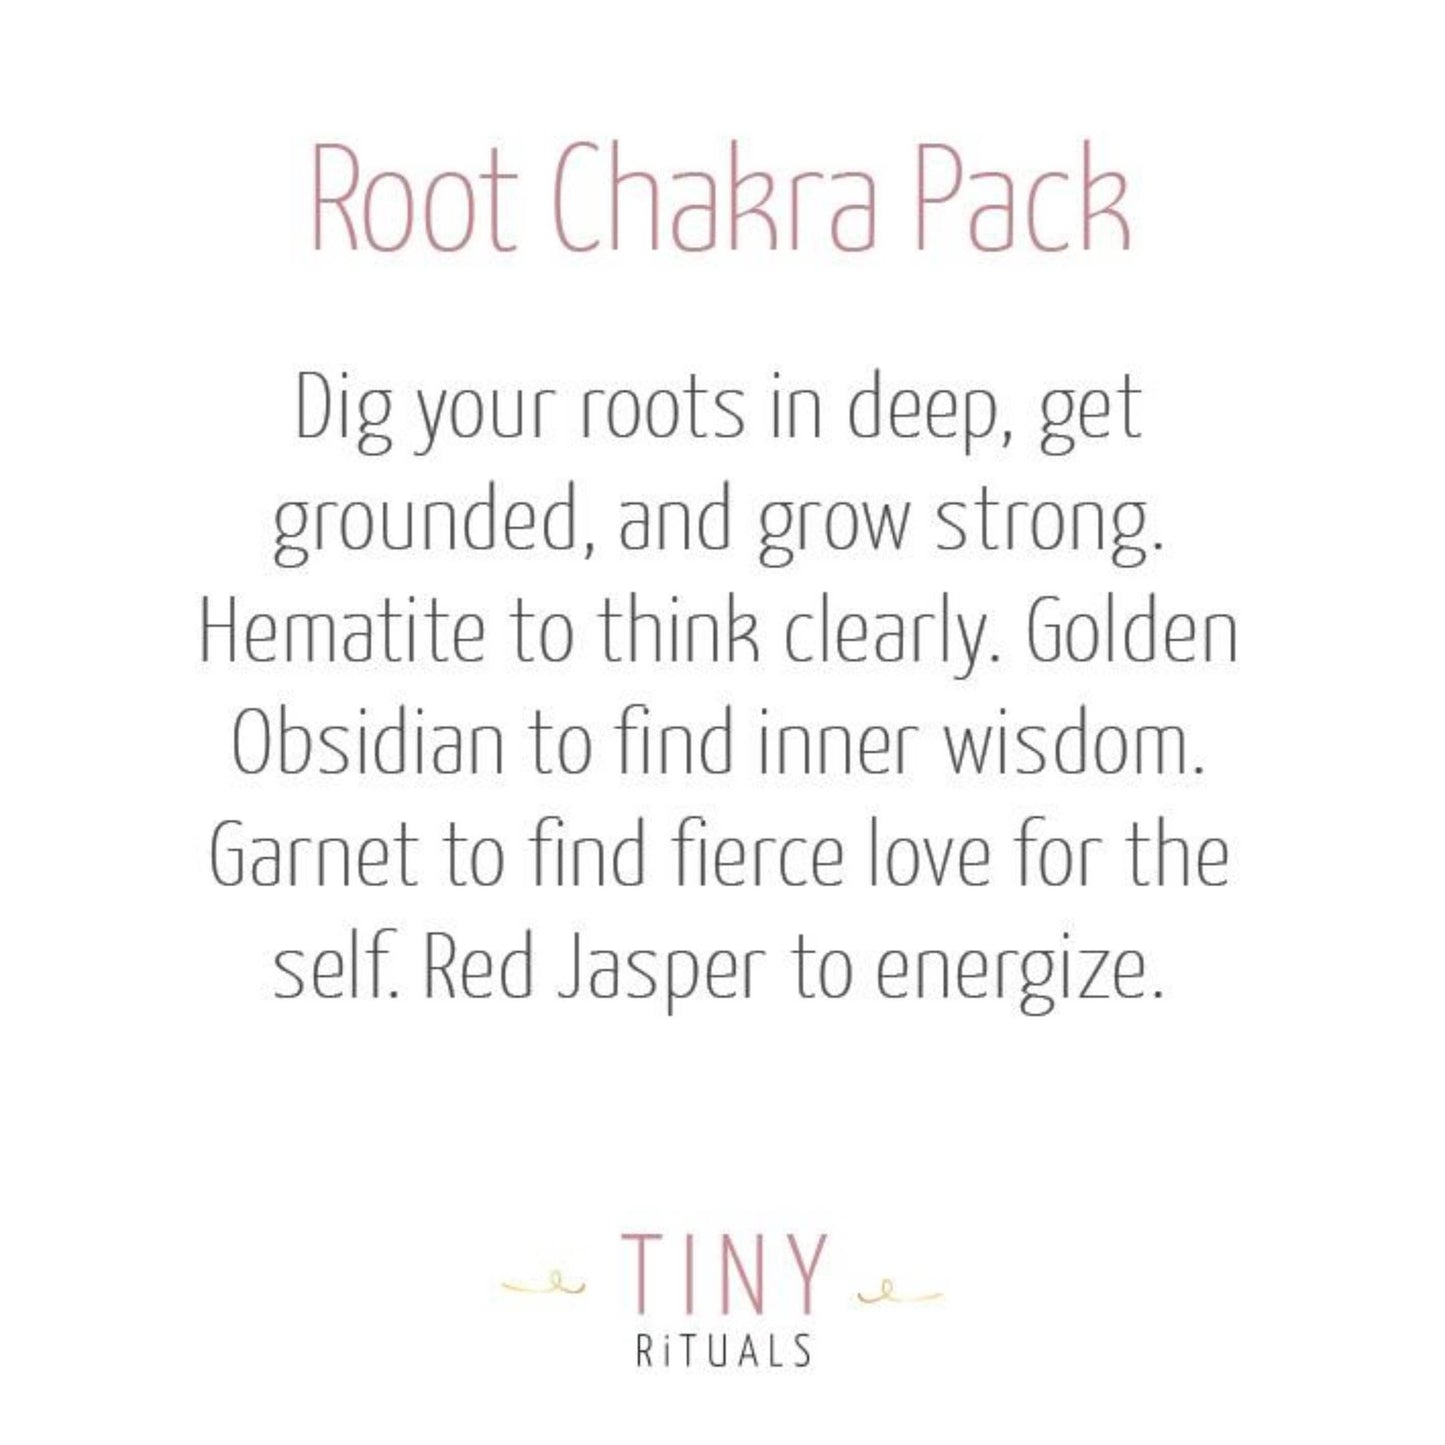 Root Chakra Pack by Tiny Rituals